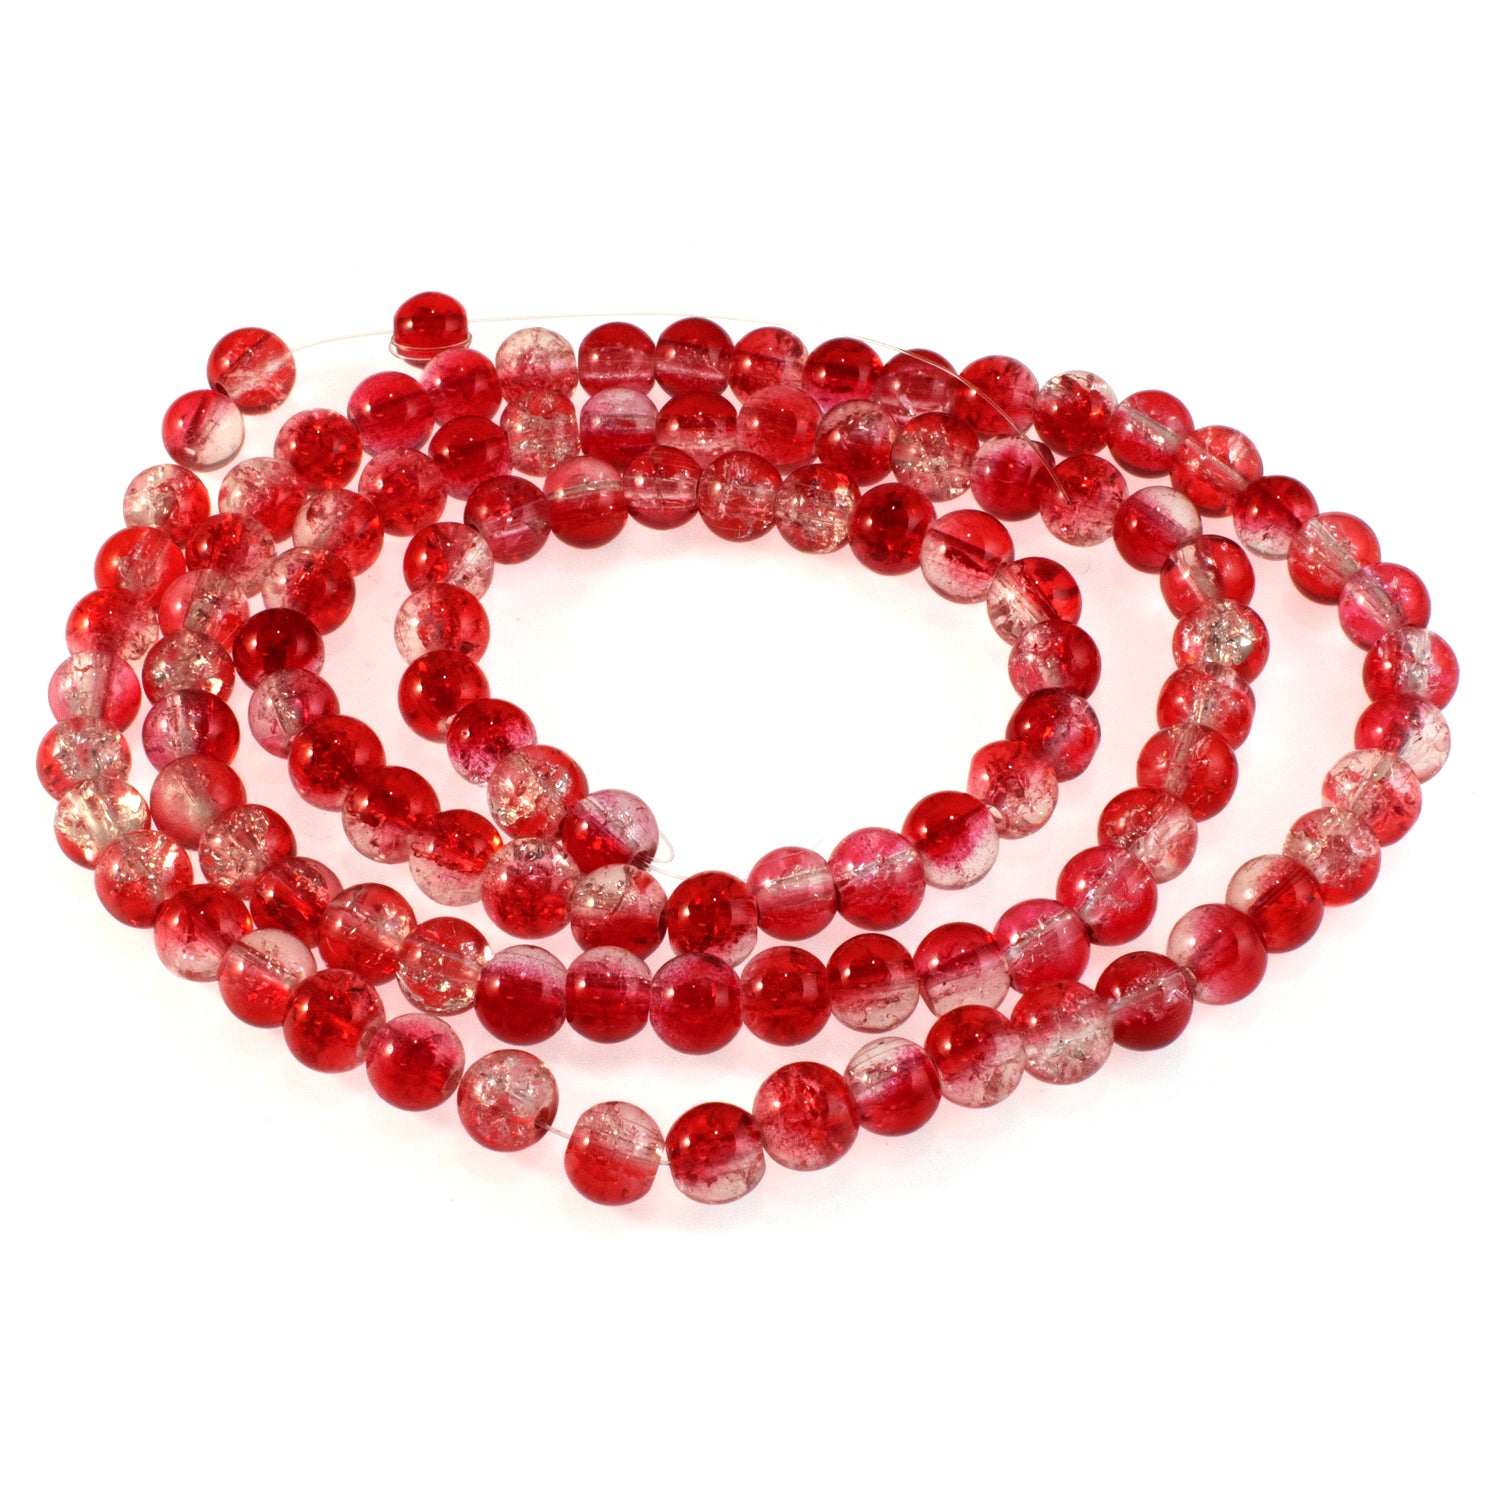 Red Assortment Small Glass Beads 2oz (60+)